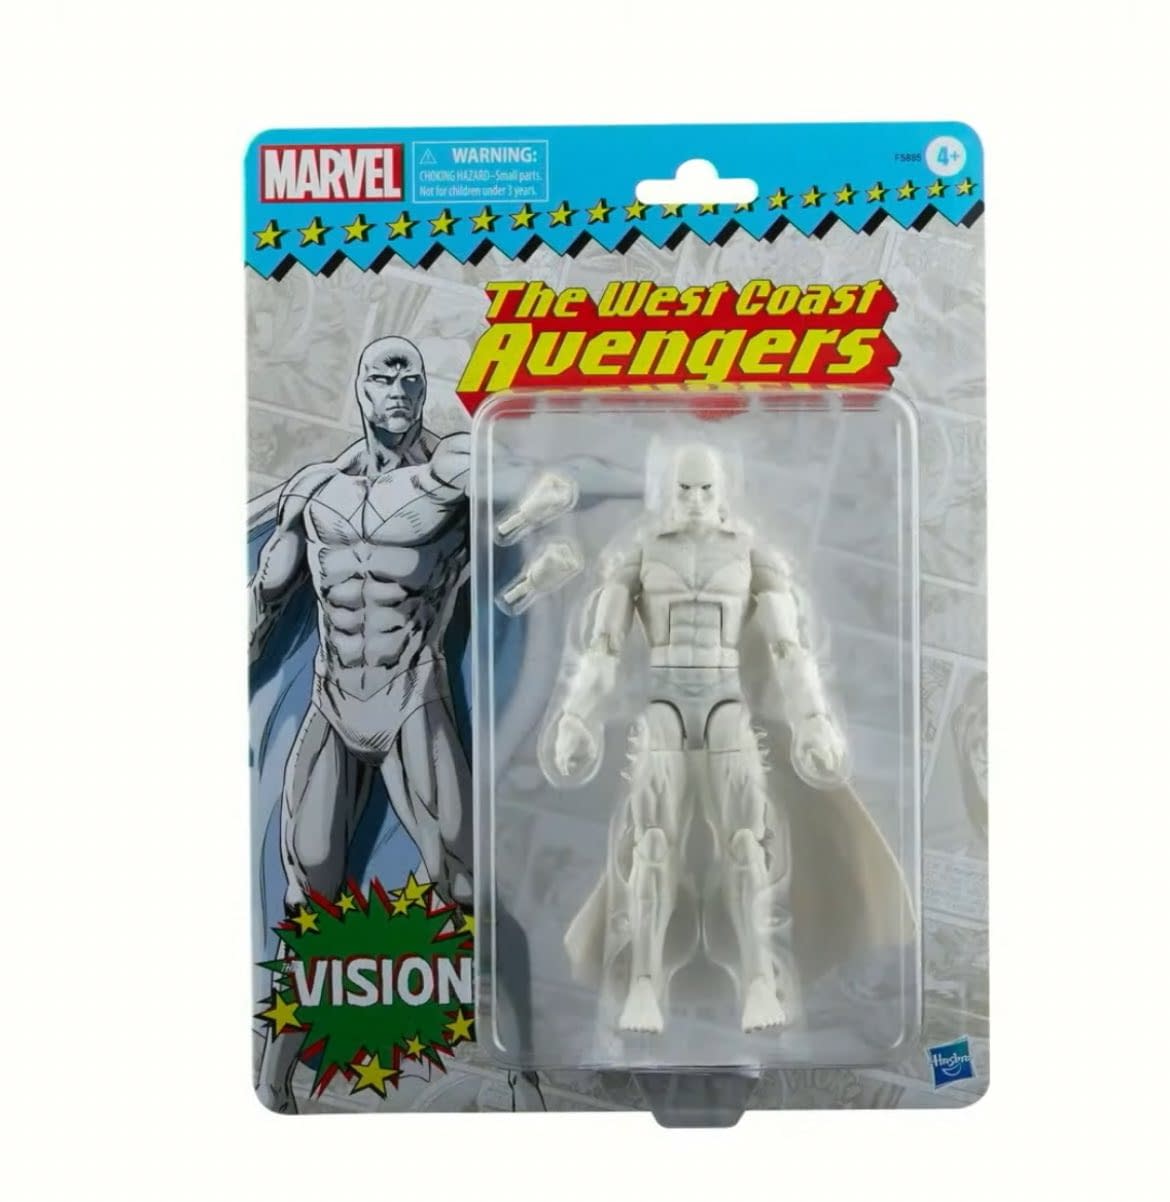 Marvel Legends Reveals Come Fast And Furious At Hasbro PulseCon